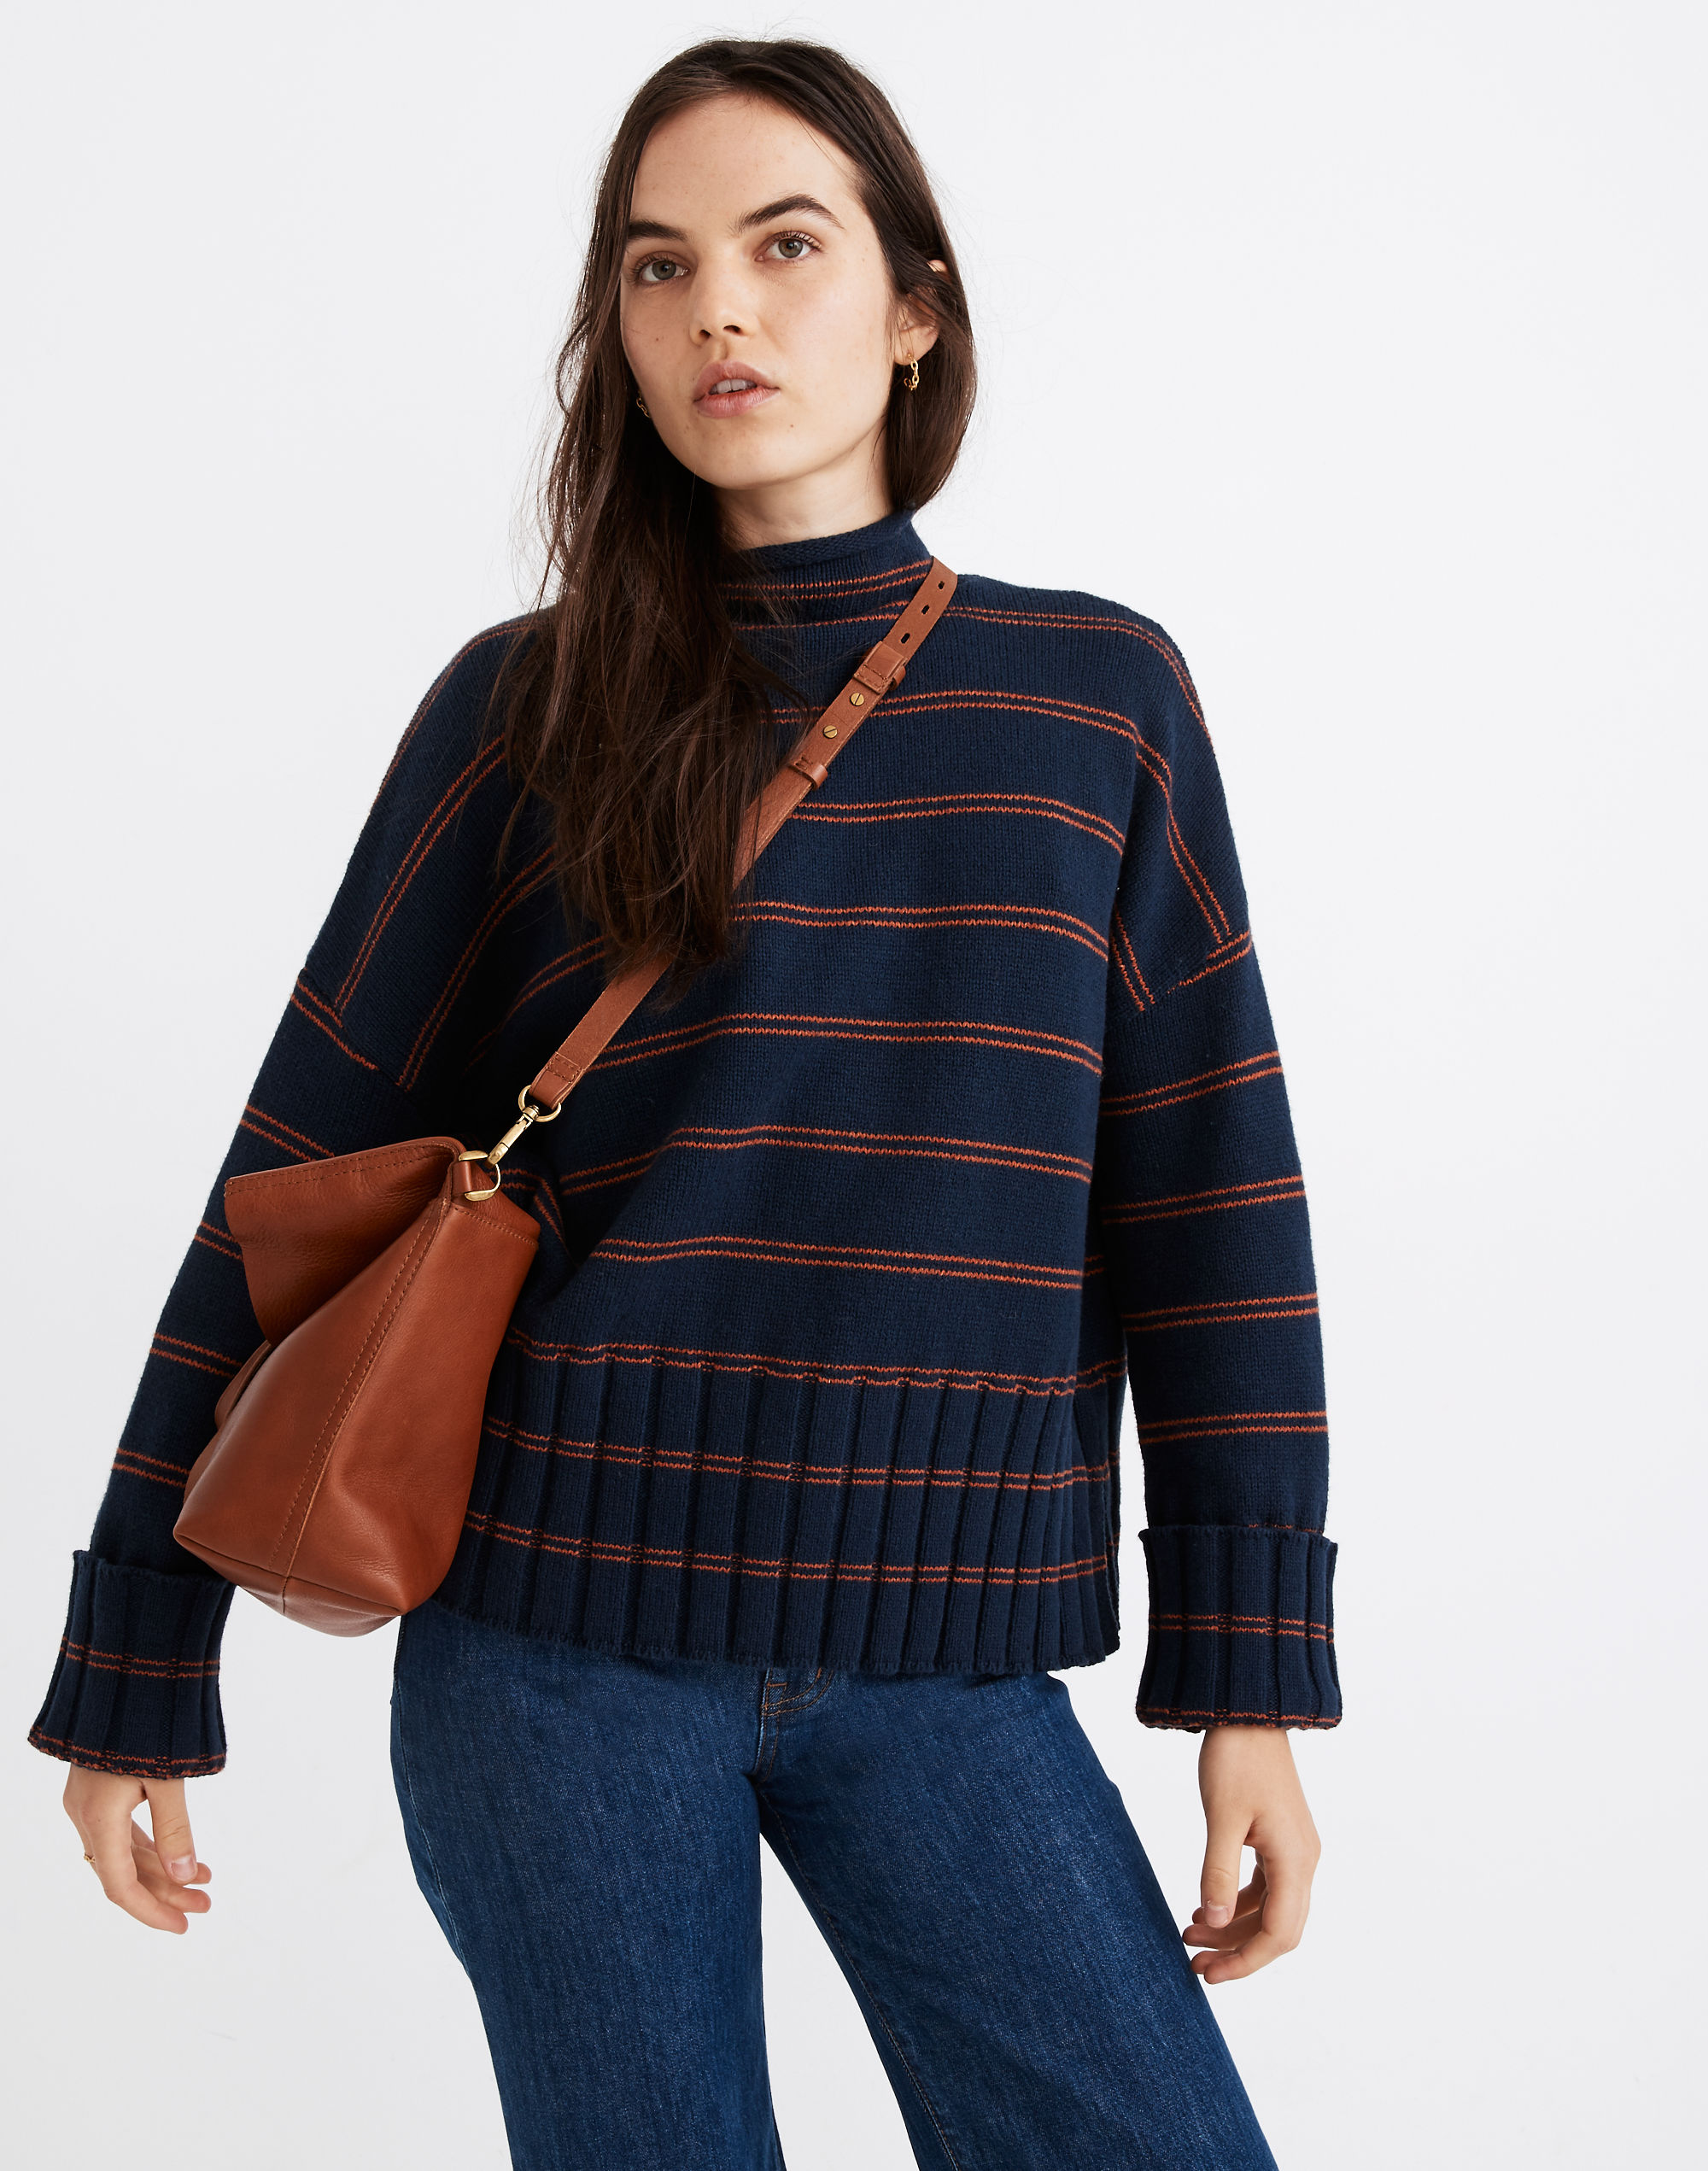 Buy Madewell Womens Fold Over Transport Tote at Ubuy India